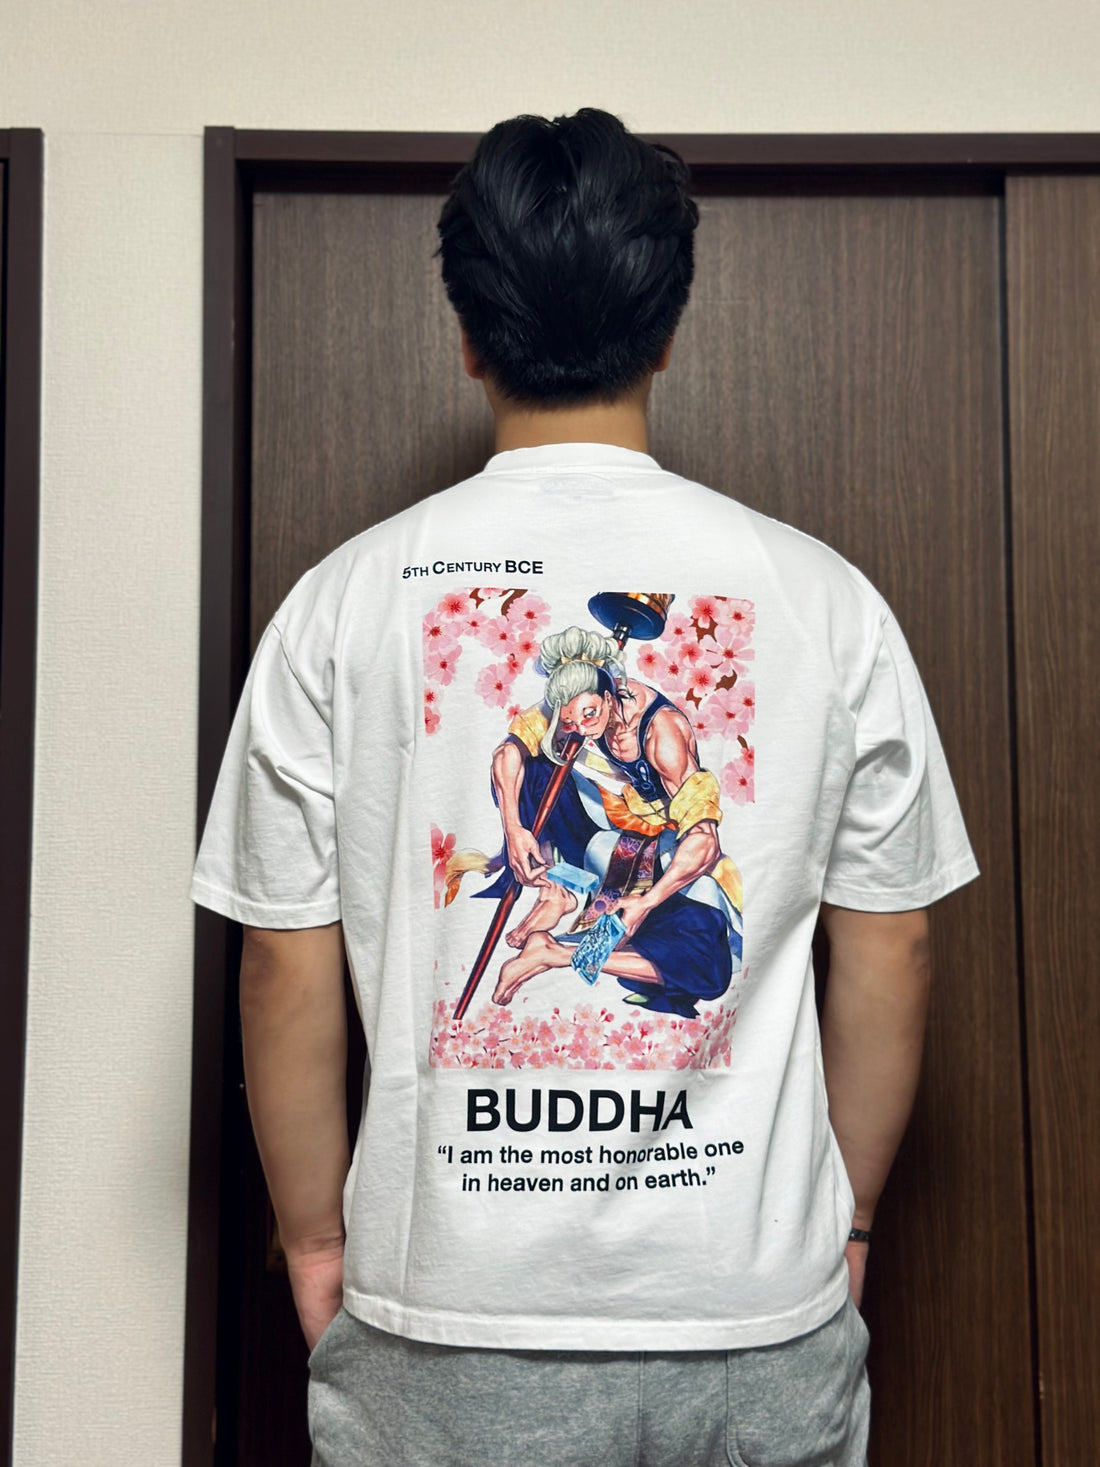 Buddha graphic tee shirt” I am the most honorable one in heaven and on earth”